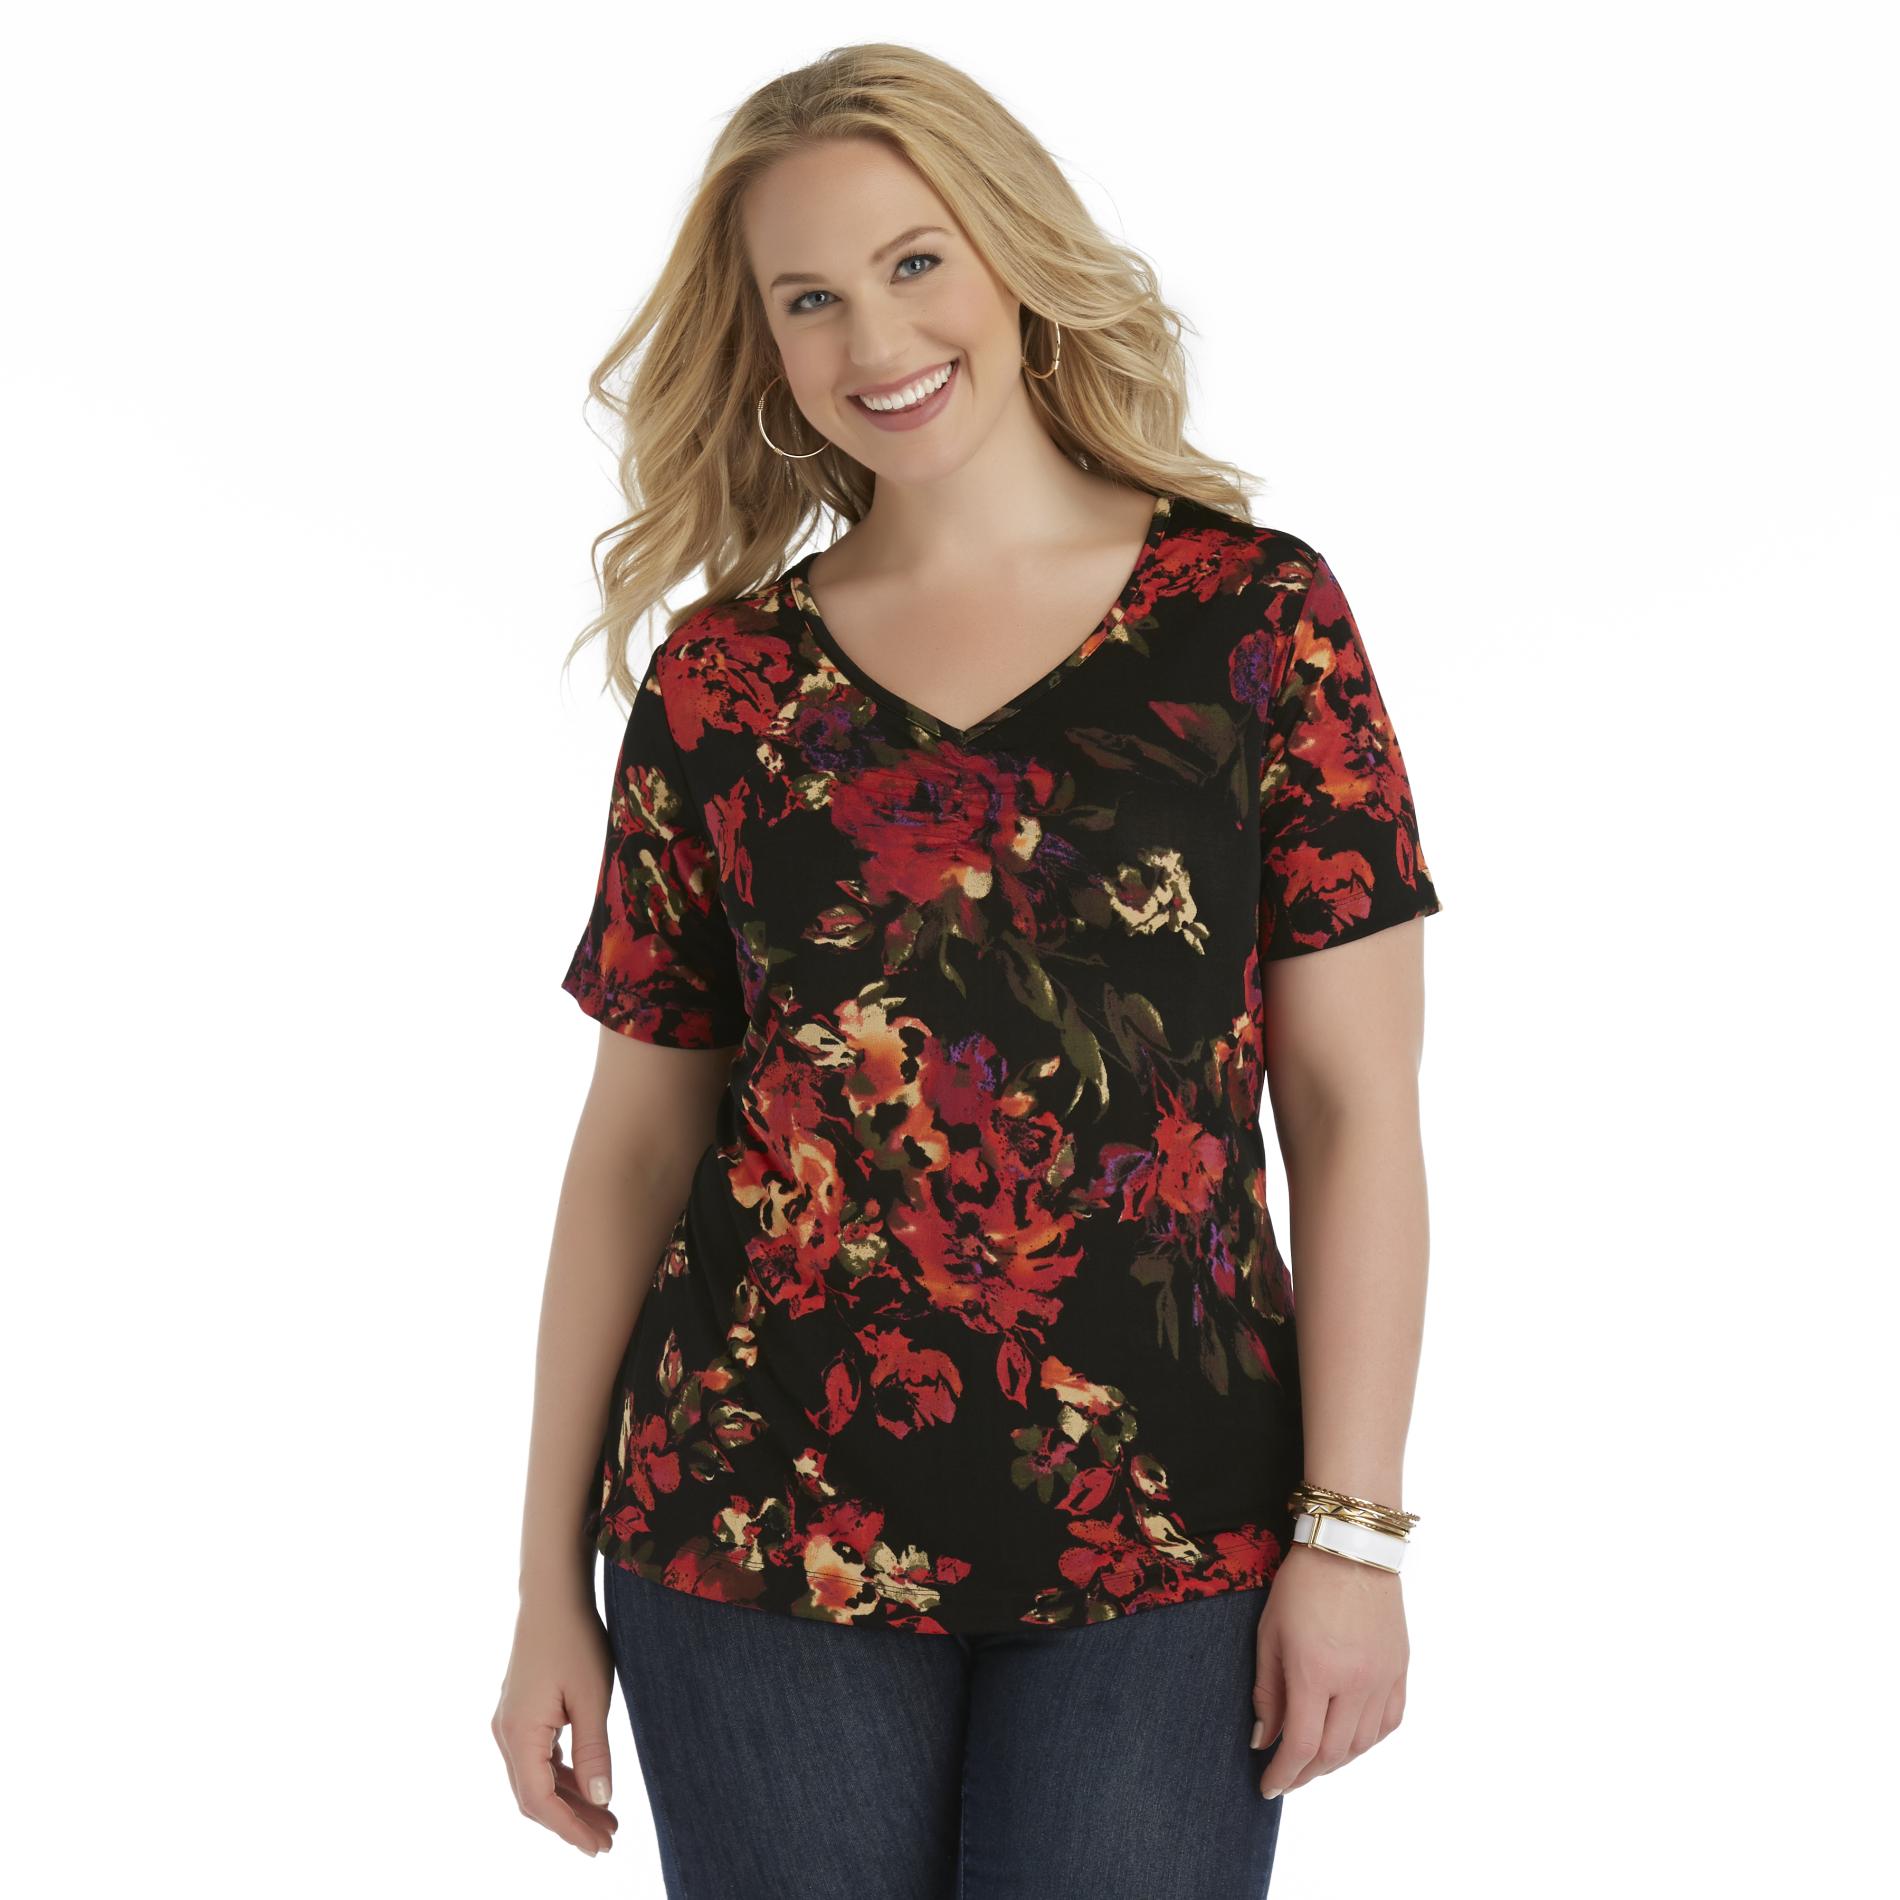 Jaclyn Smith Women's Plus Short-Sleeve V-Neck Top - Floral